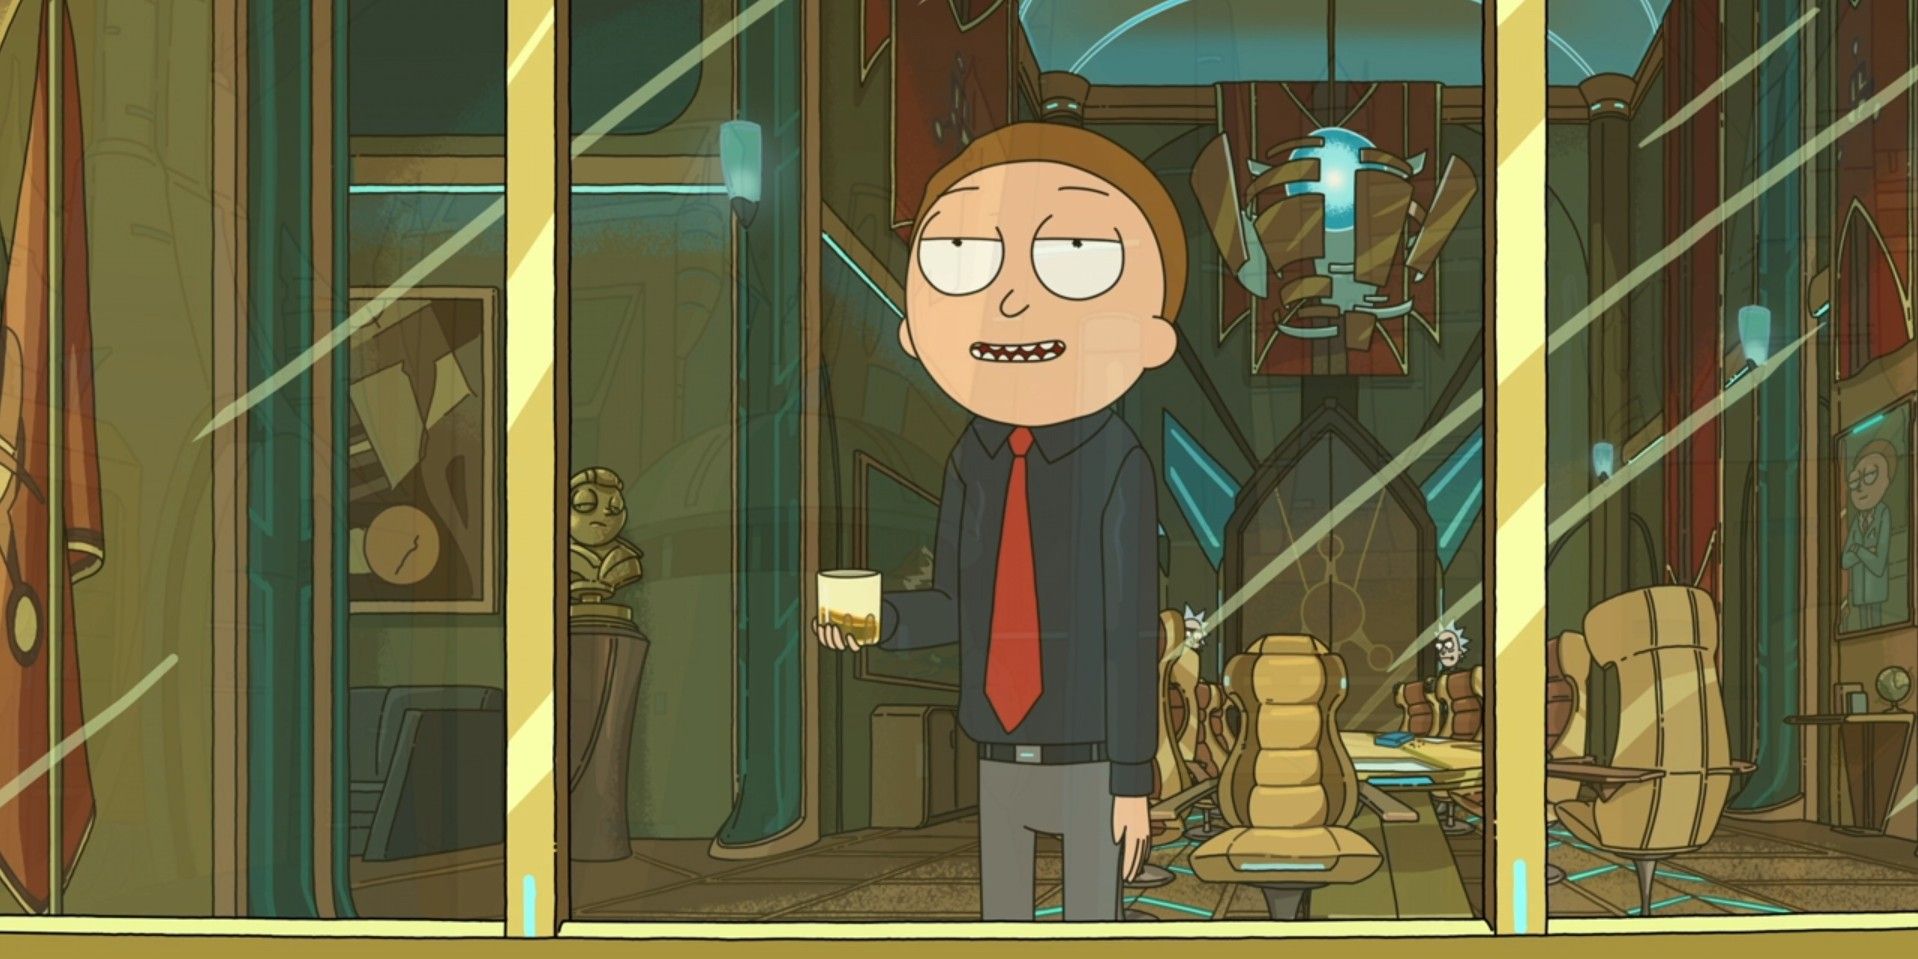 President Morty at the Citadel